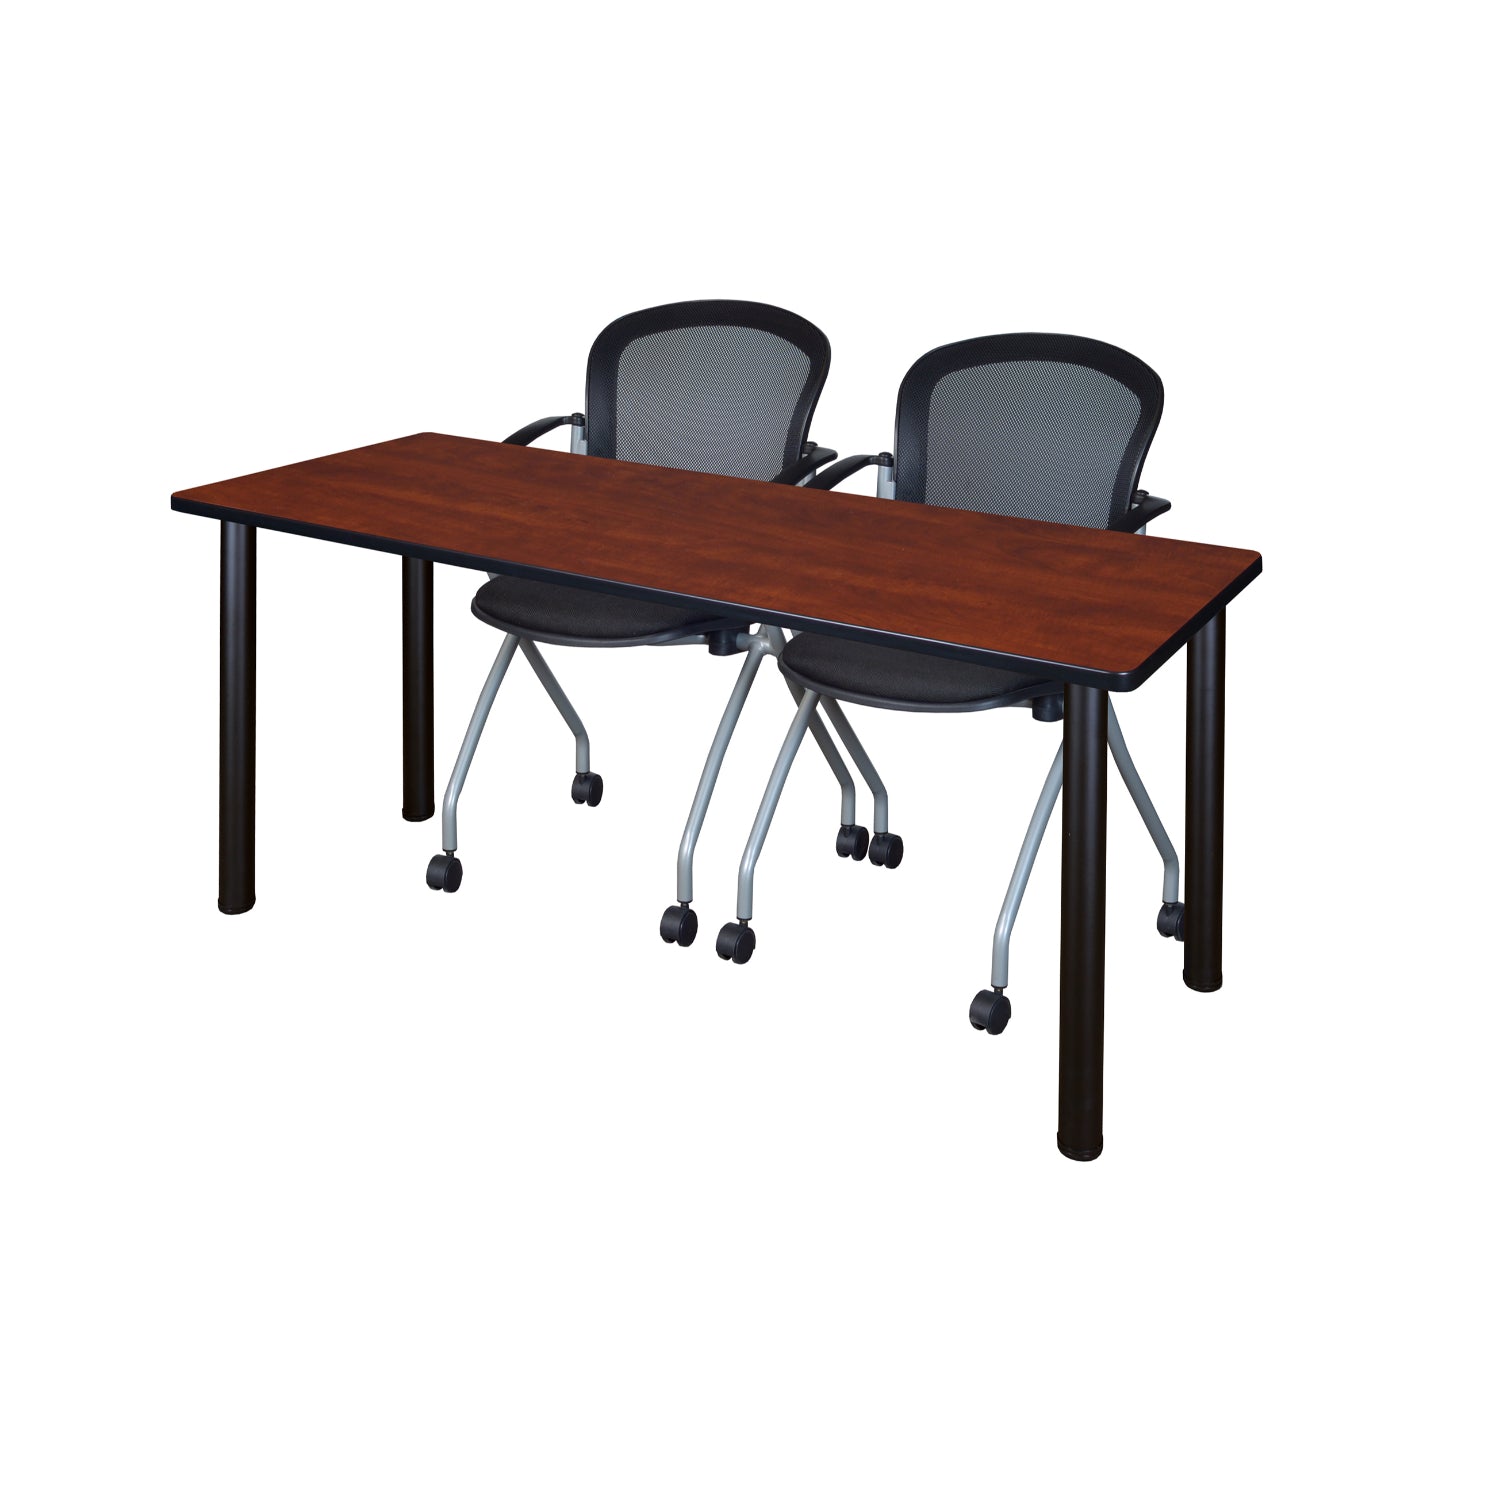 Kee Training Table and Chair Package, Kee 72" x 24" Post Leg Training/Seminar Table with 2 Cadence Nesting Chairs